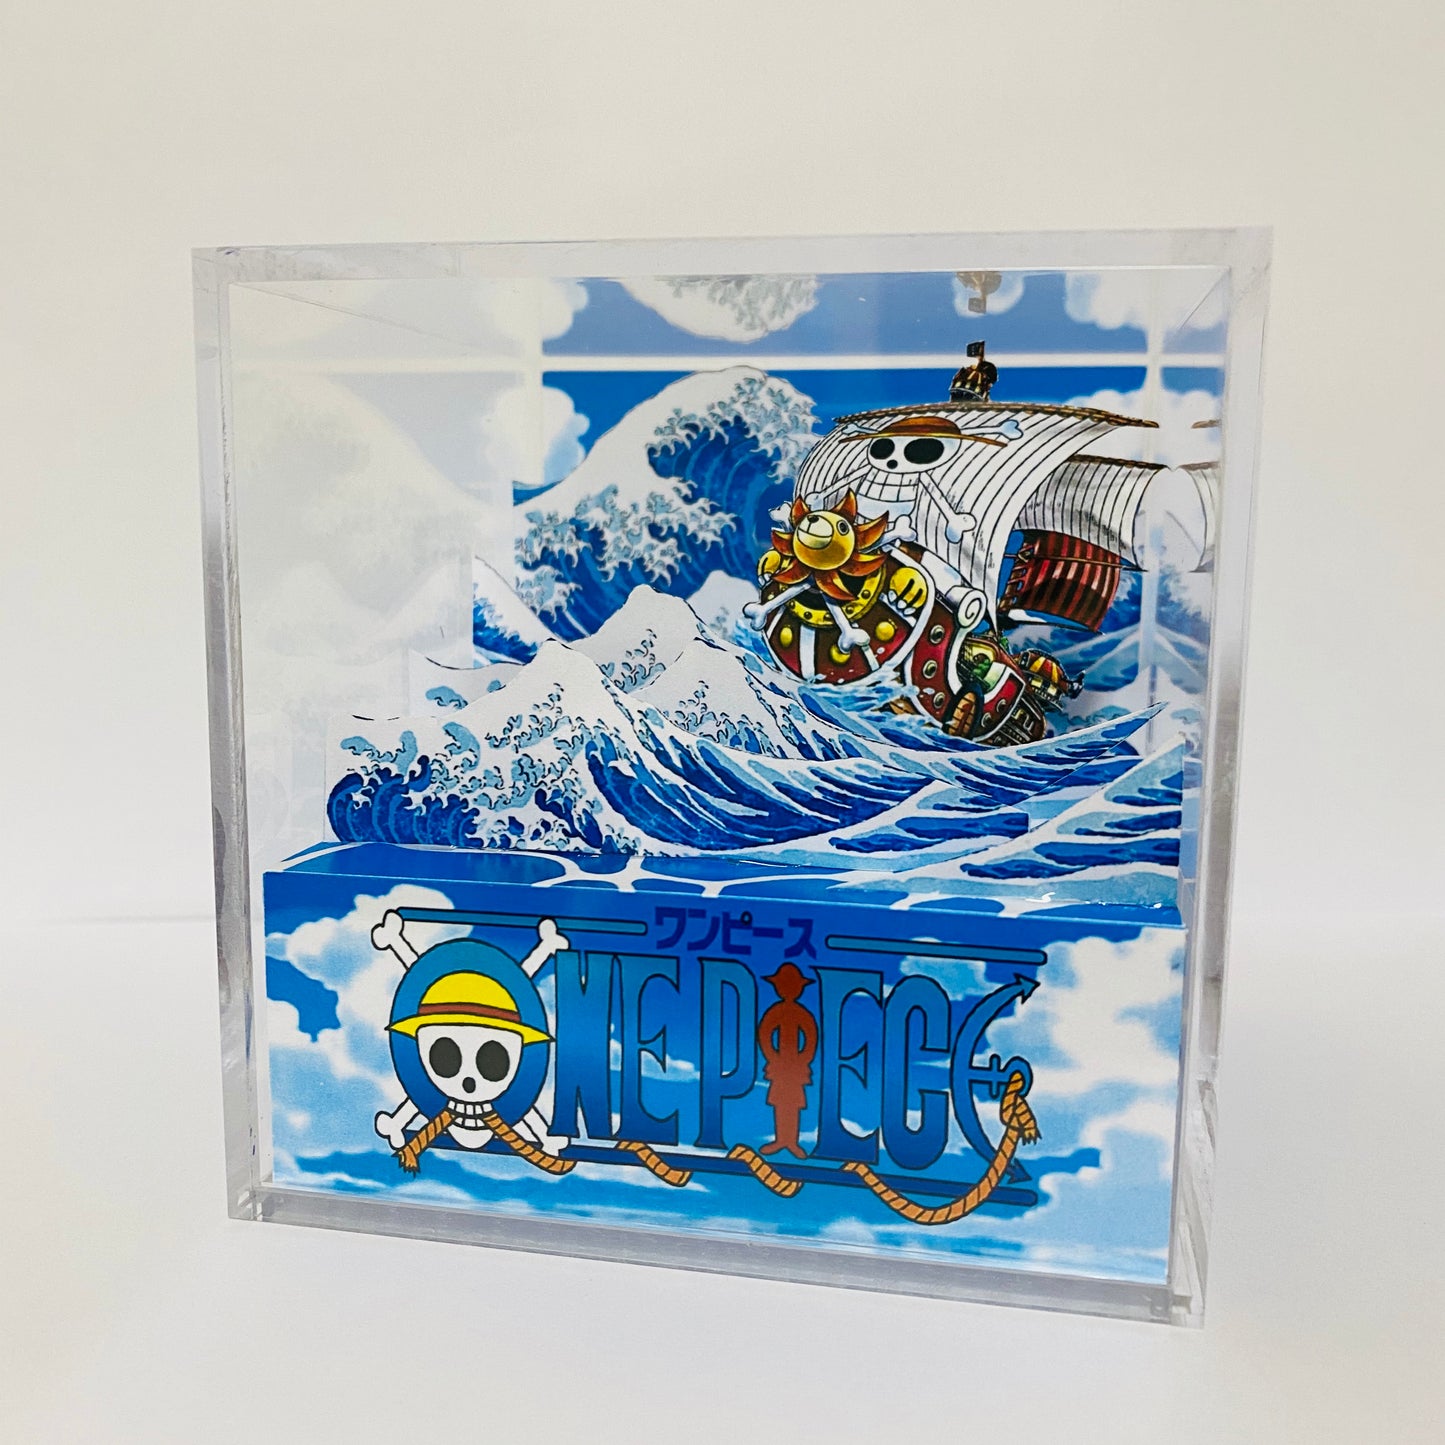 INSNIC One Piece Classic 3D Crystal Diorama Box